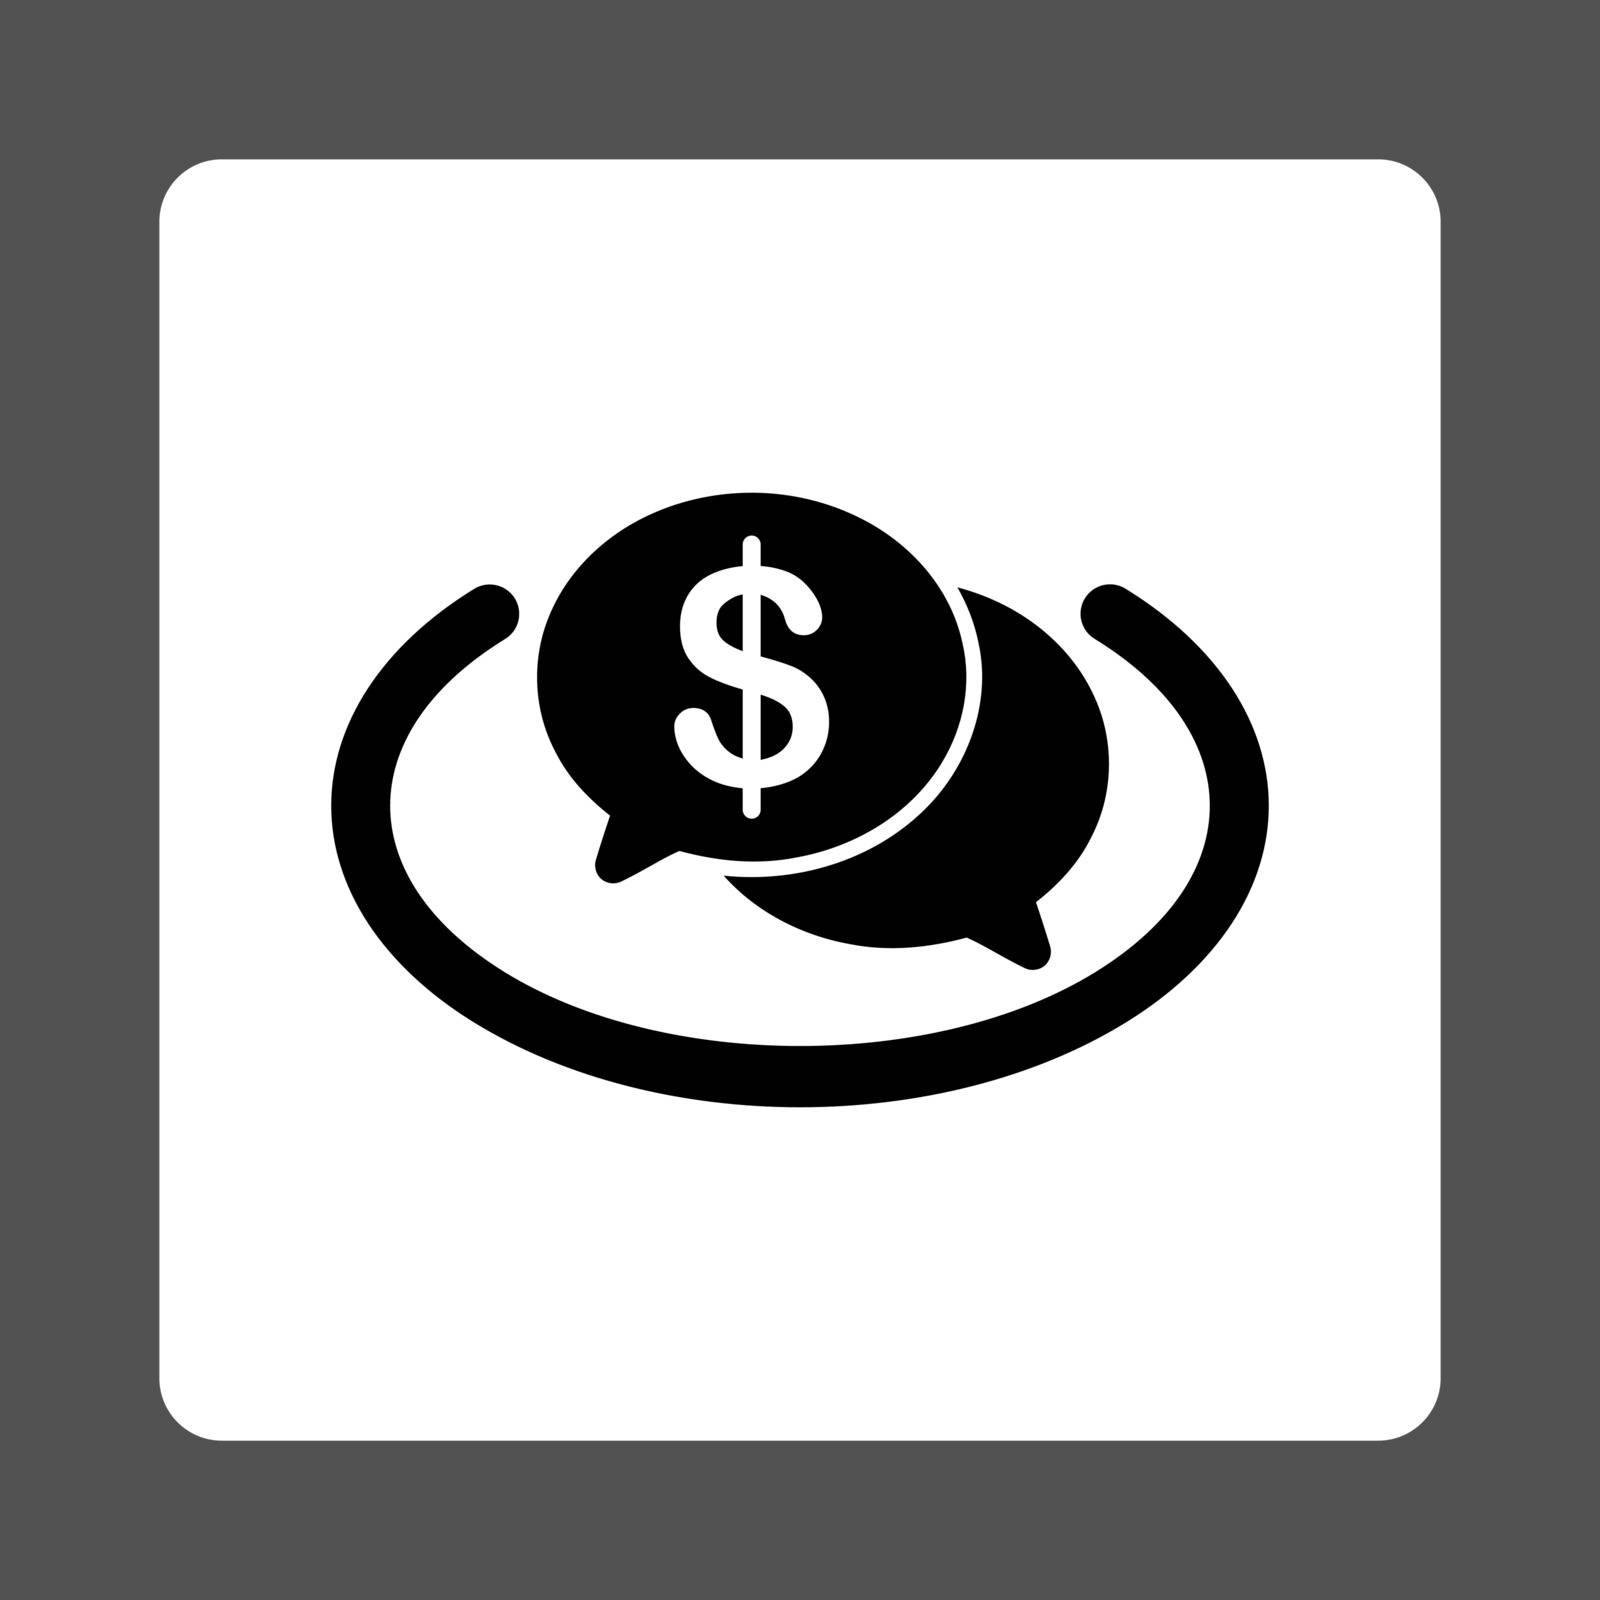 Financial Network icon by ahasoft